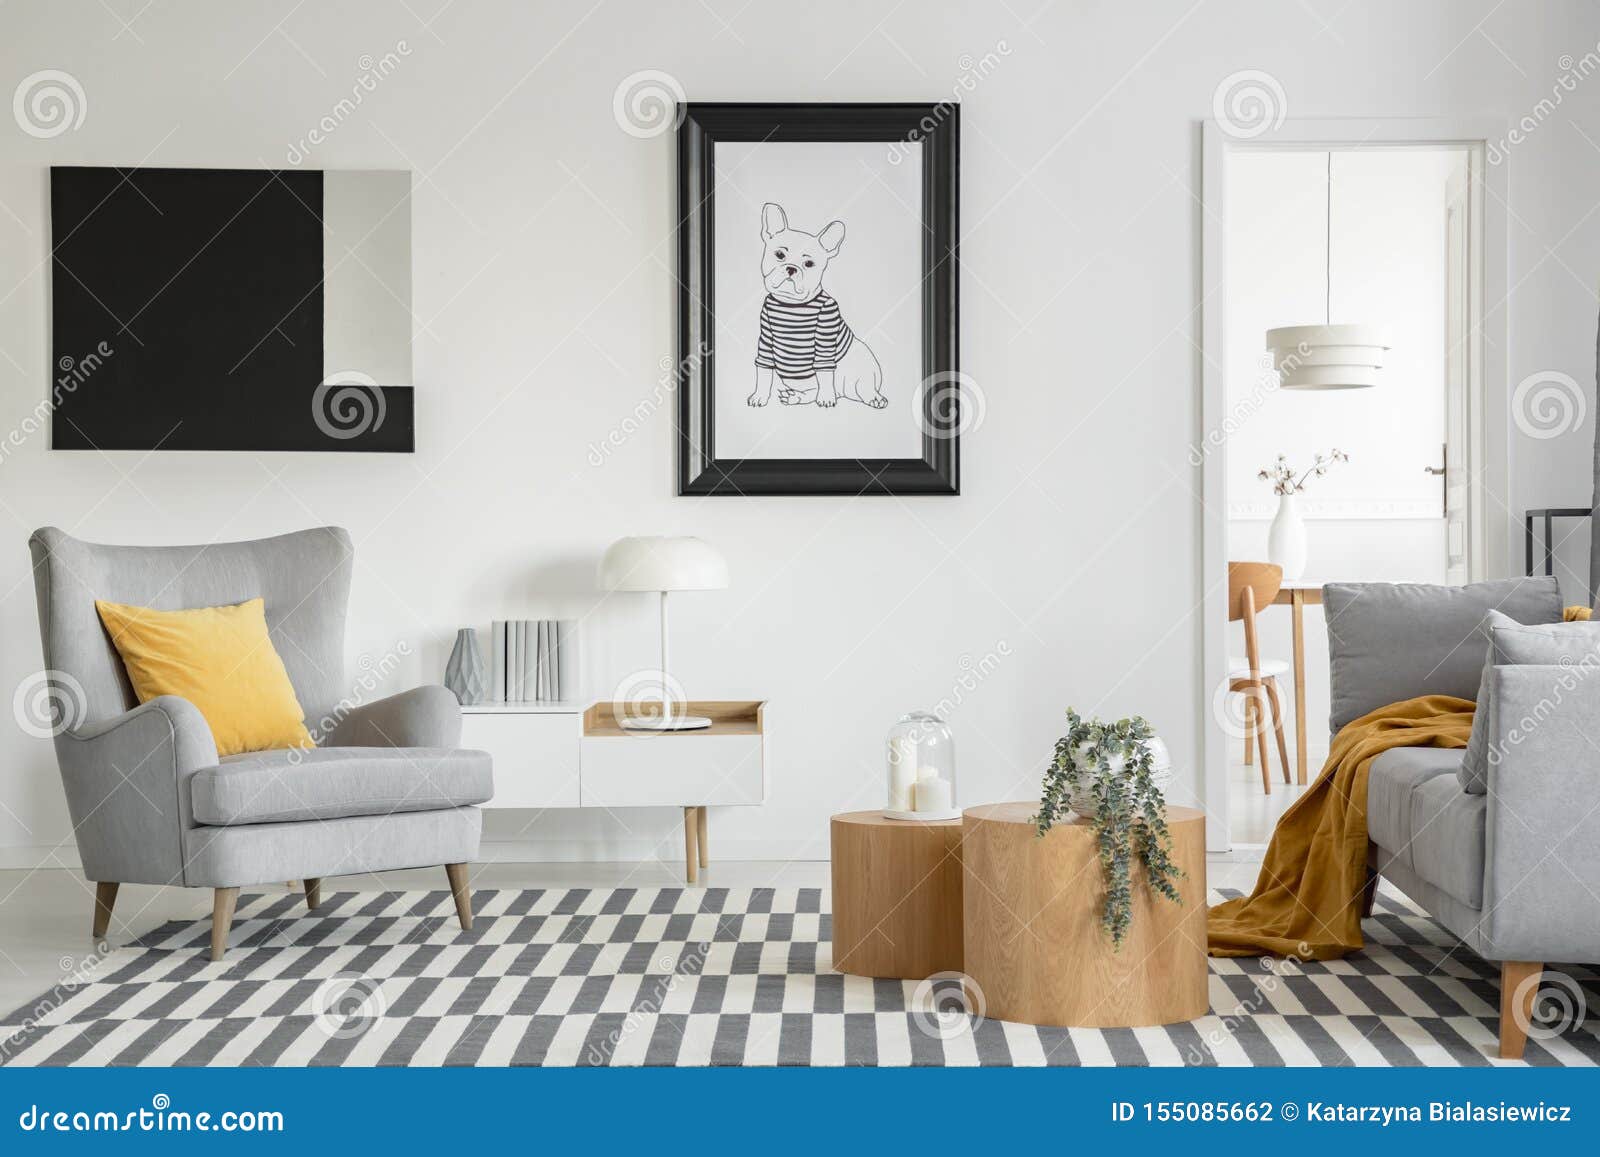 black and white poster of dog on the wall of fashionable living room interior with two wooden coffee tables with flowers